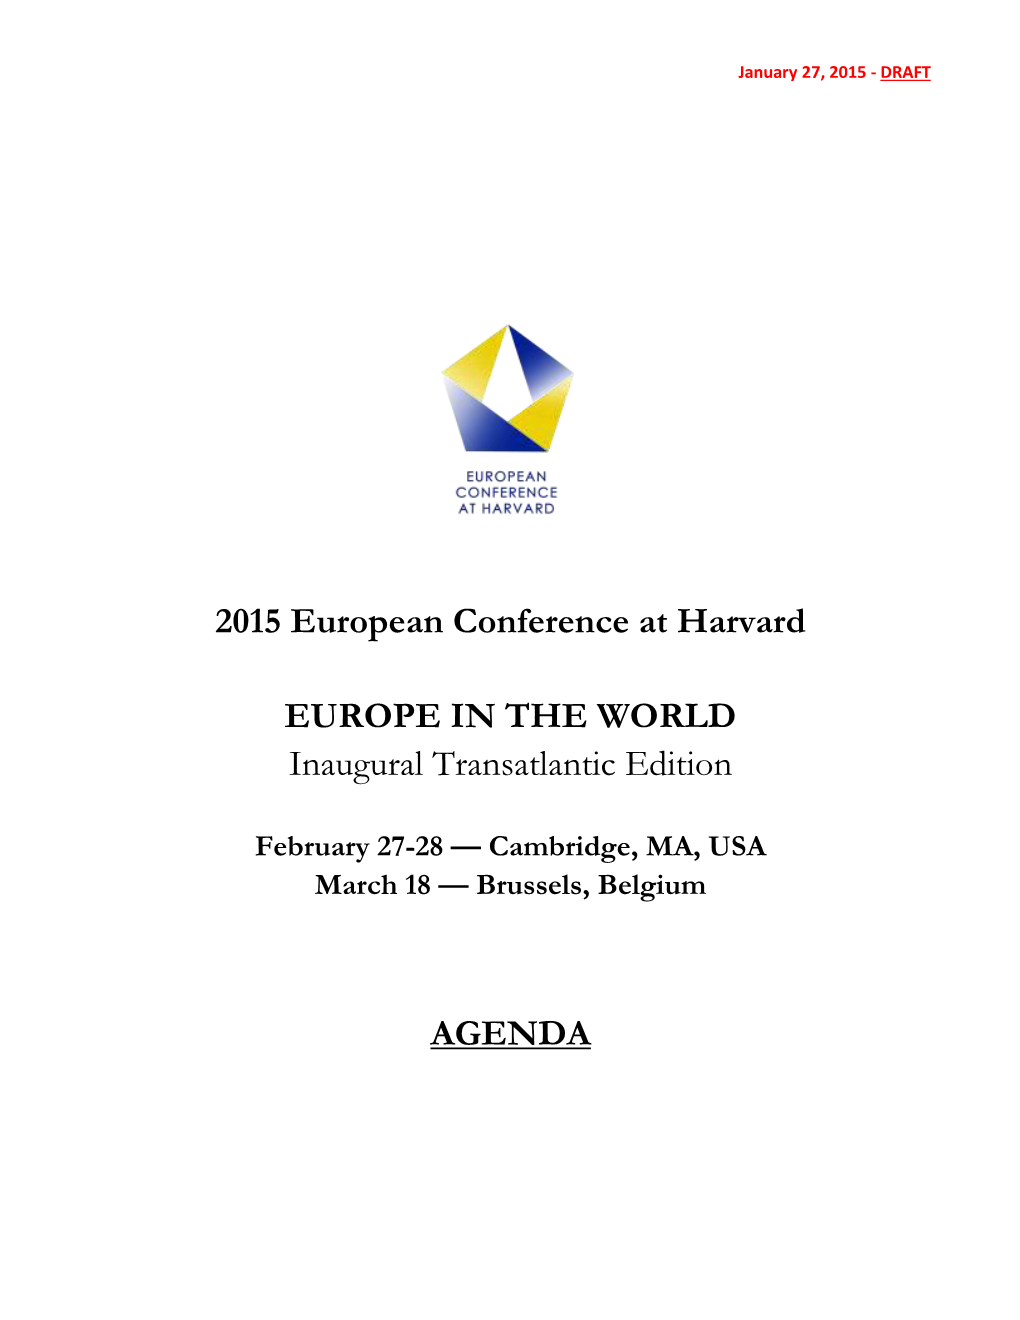 2015 European Conference at Harvard EUROPE in the WORLD